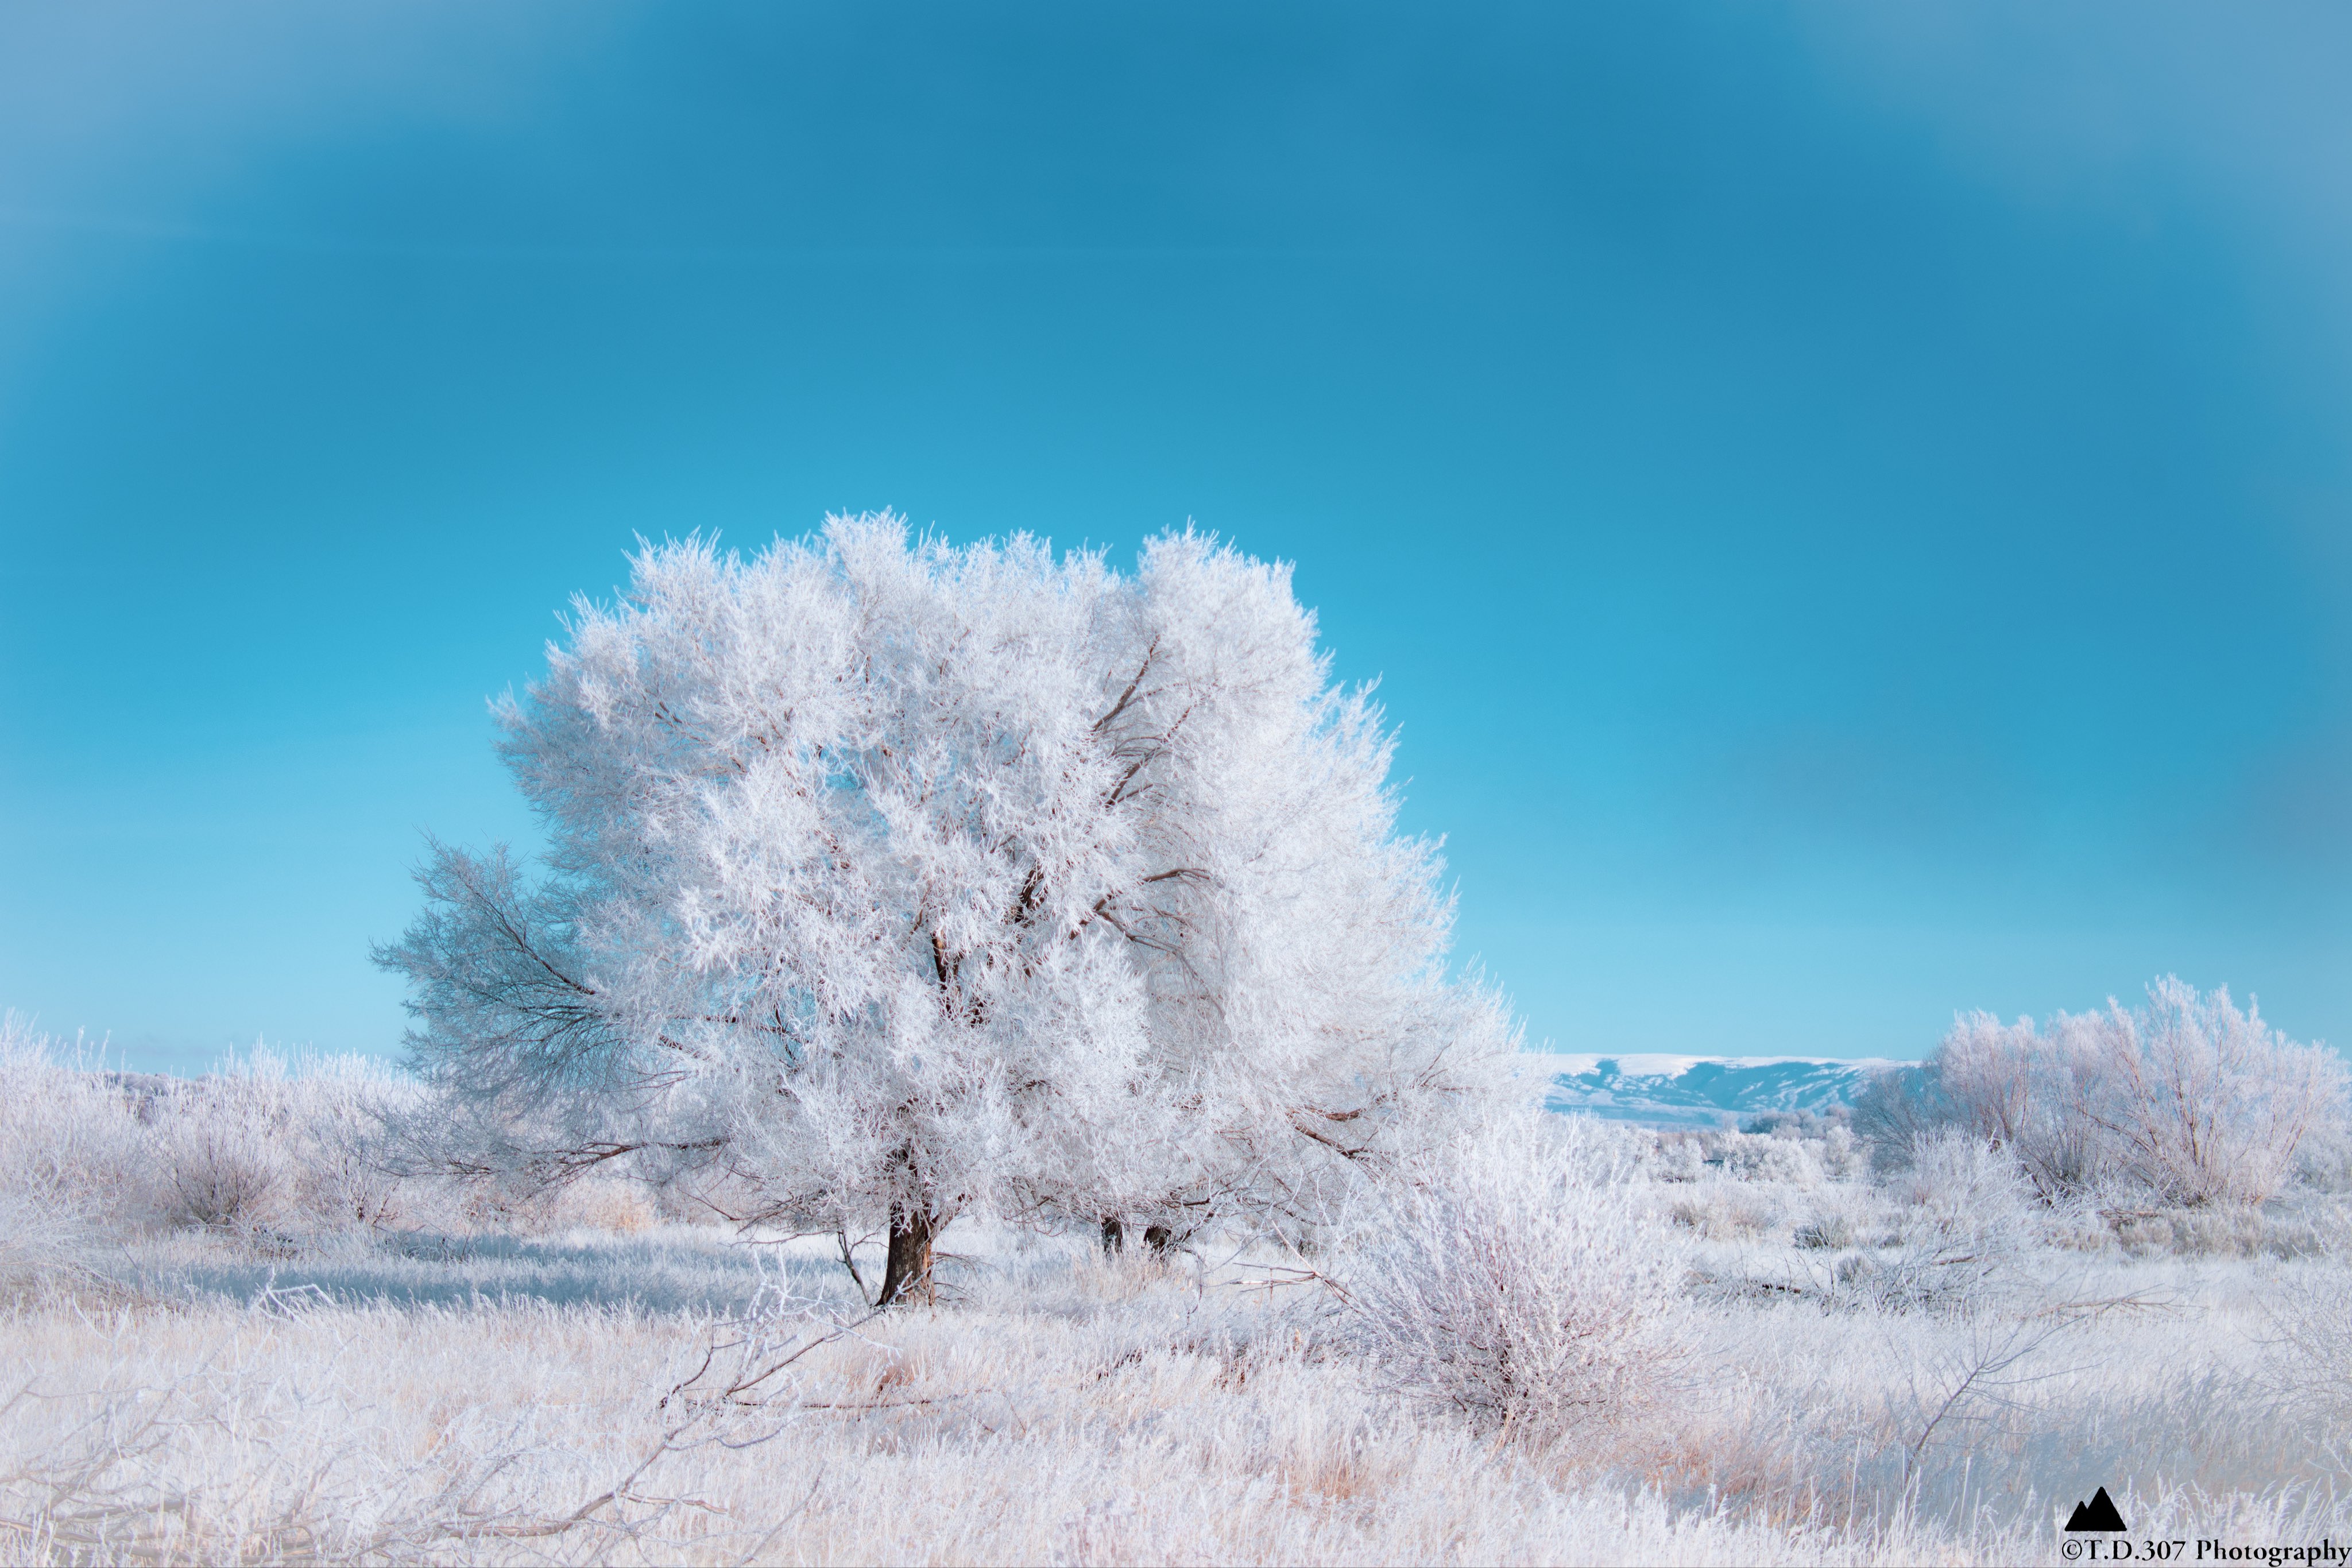 2nd Place Hoar frost blankets Northwest Wyoming by T.D.307 Photography @TonyD2155